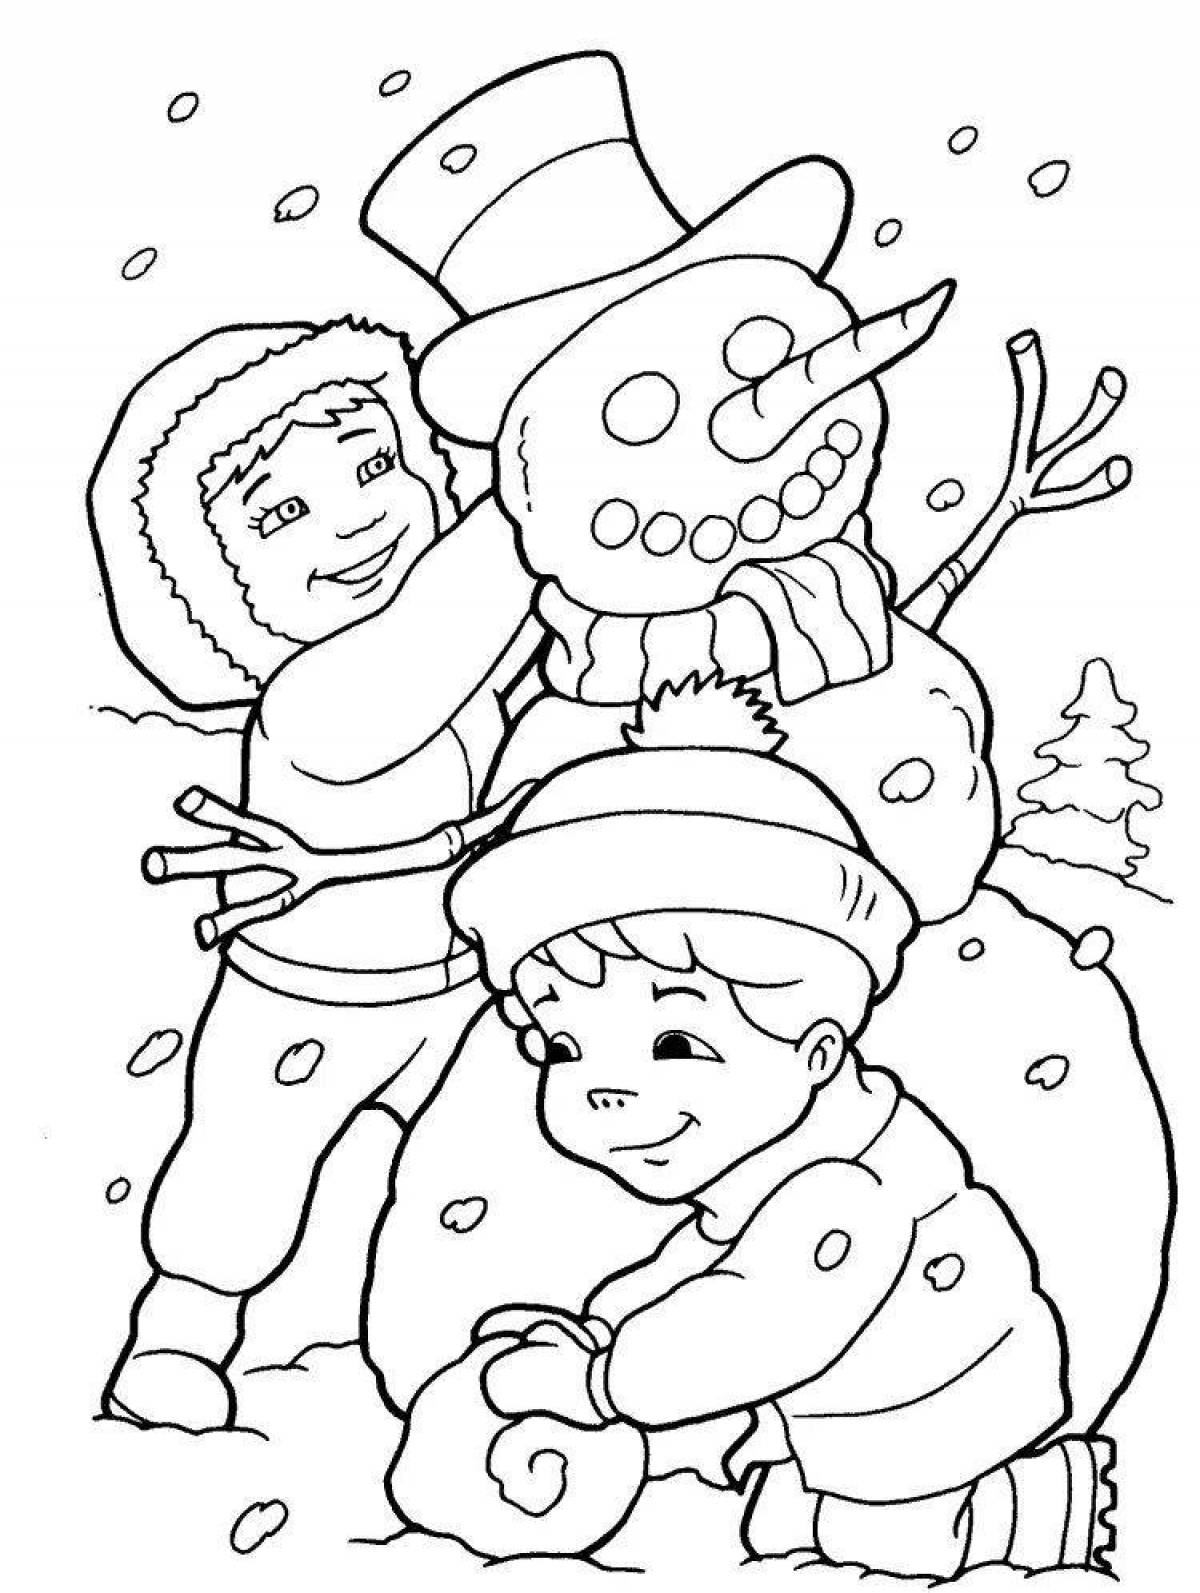 A fun winter coloring book for 3-4 year olds